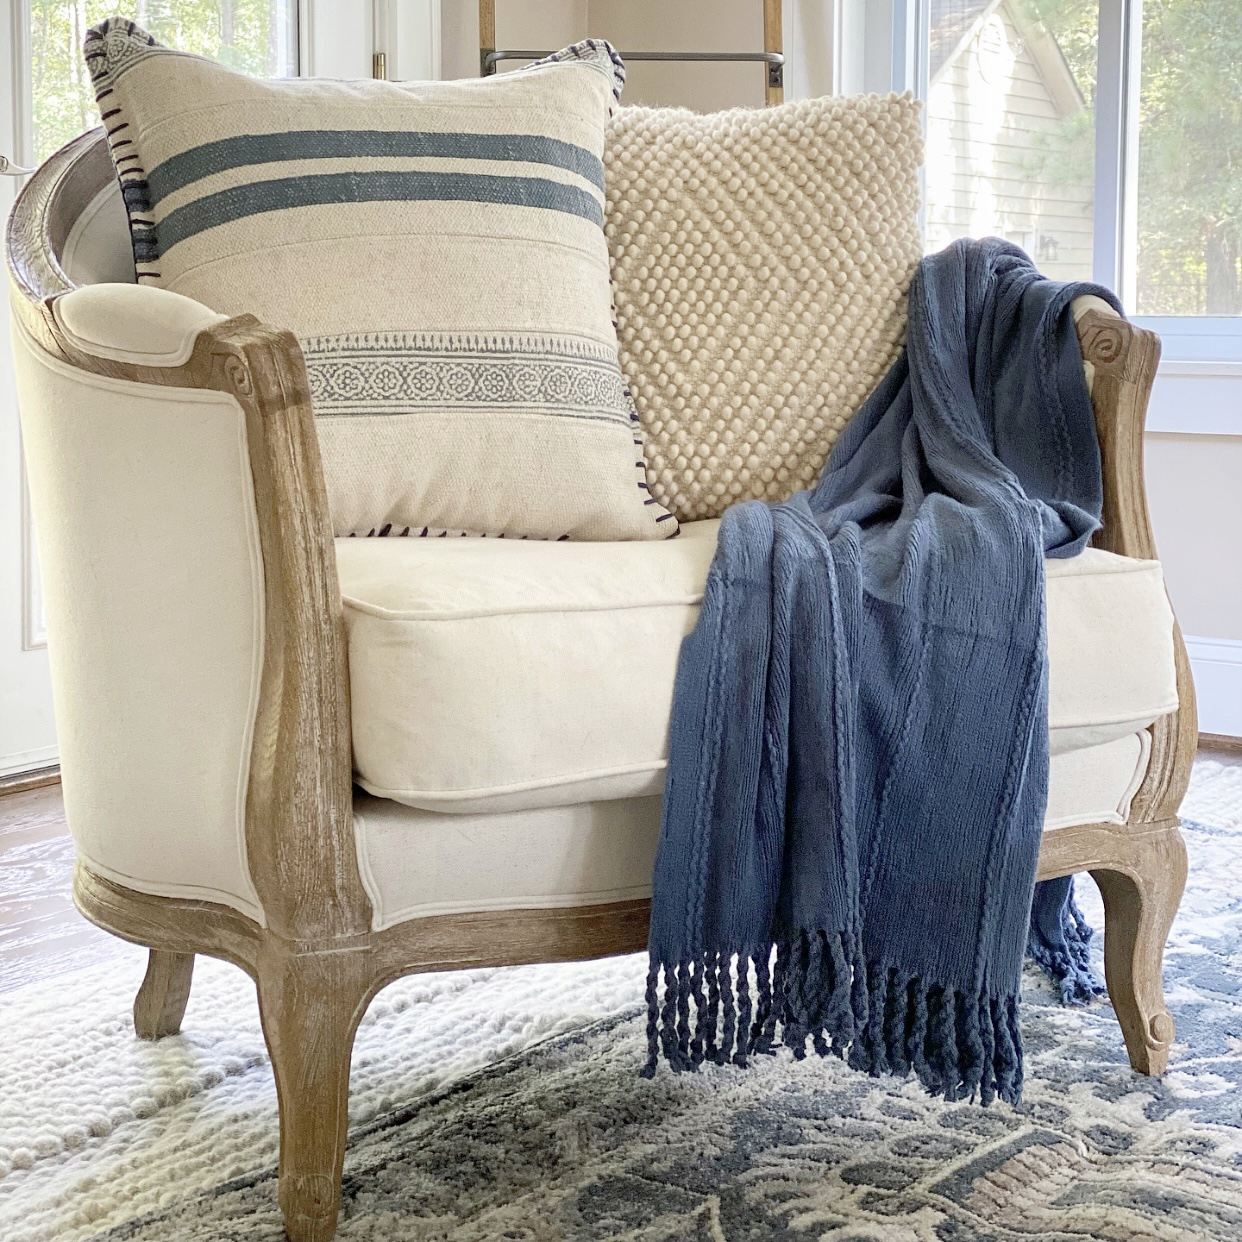 Blue knit blanket draped over the arm of a white and wood club chair.